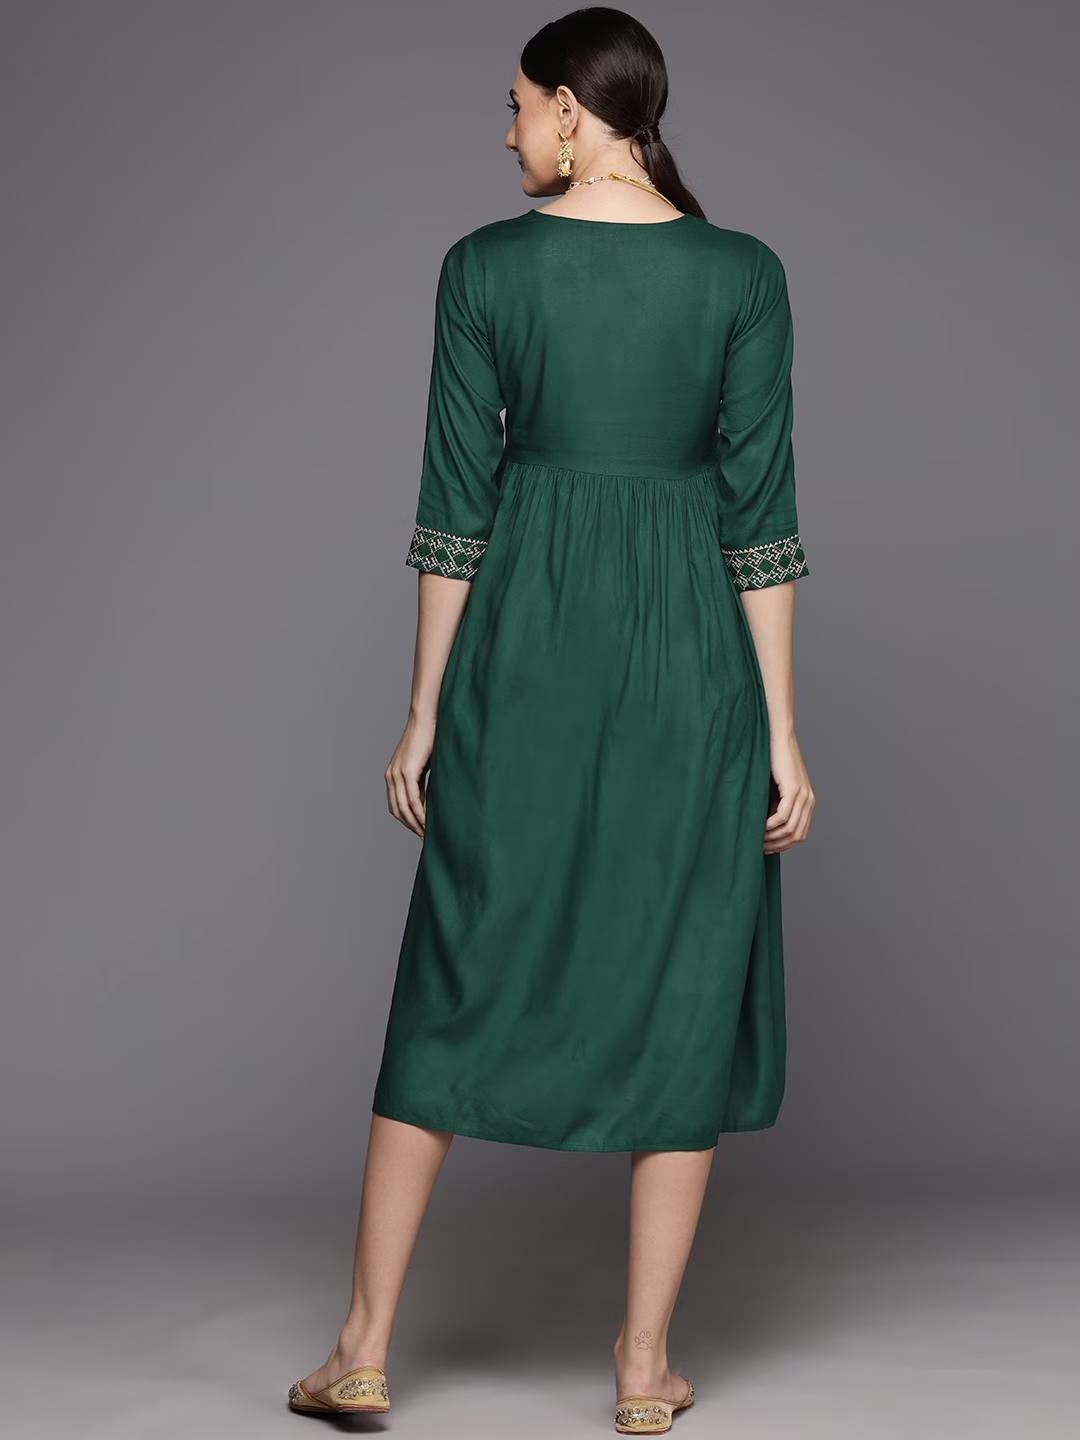 Green & Olive Green Embroidered A-Line Midi Dress